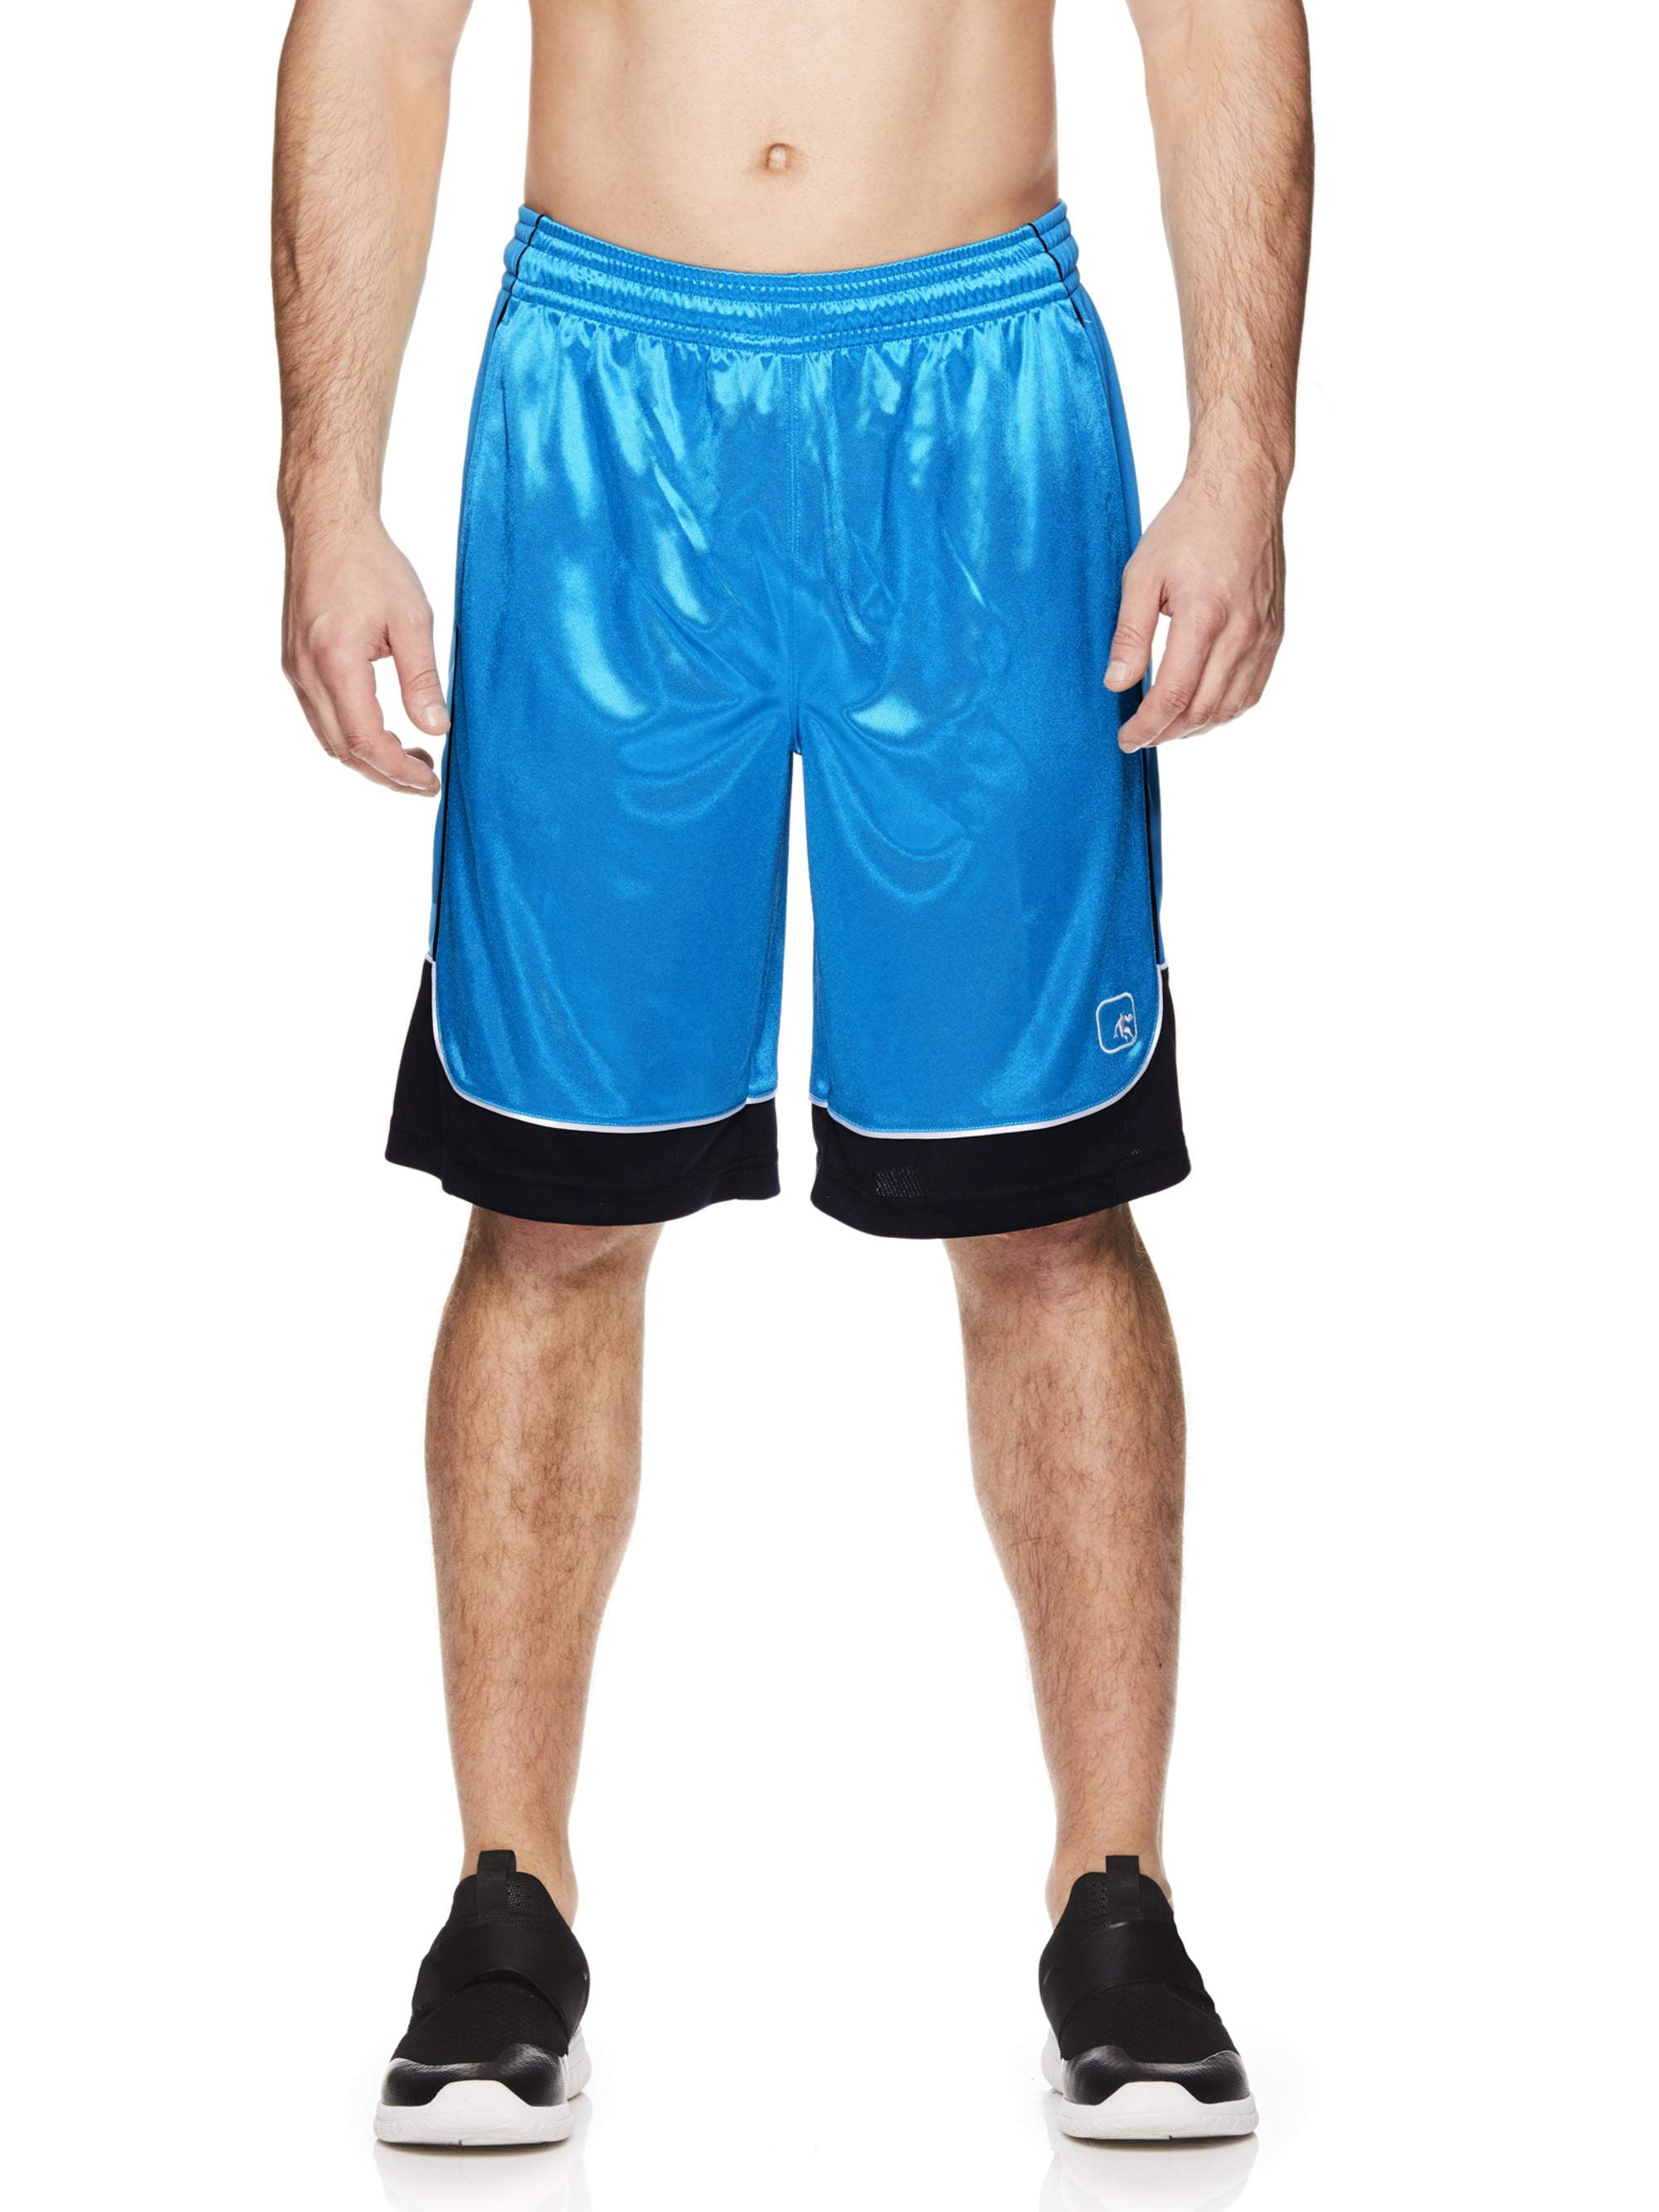 AND1 - AND1 Men's Colorblock Basketball Shorts, Up to 5XL - Walmart.com